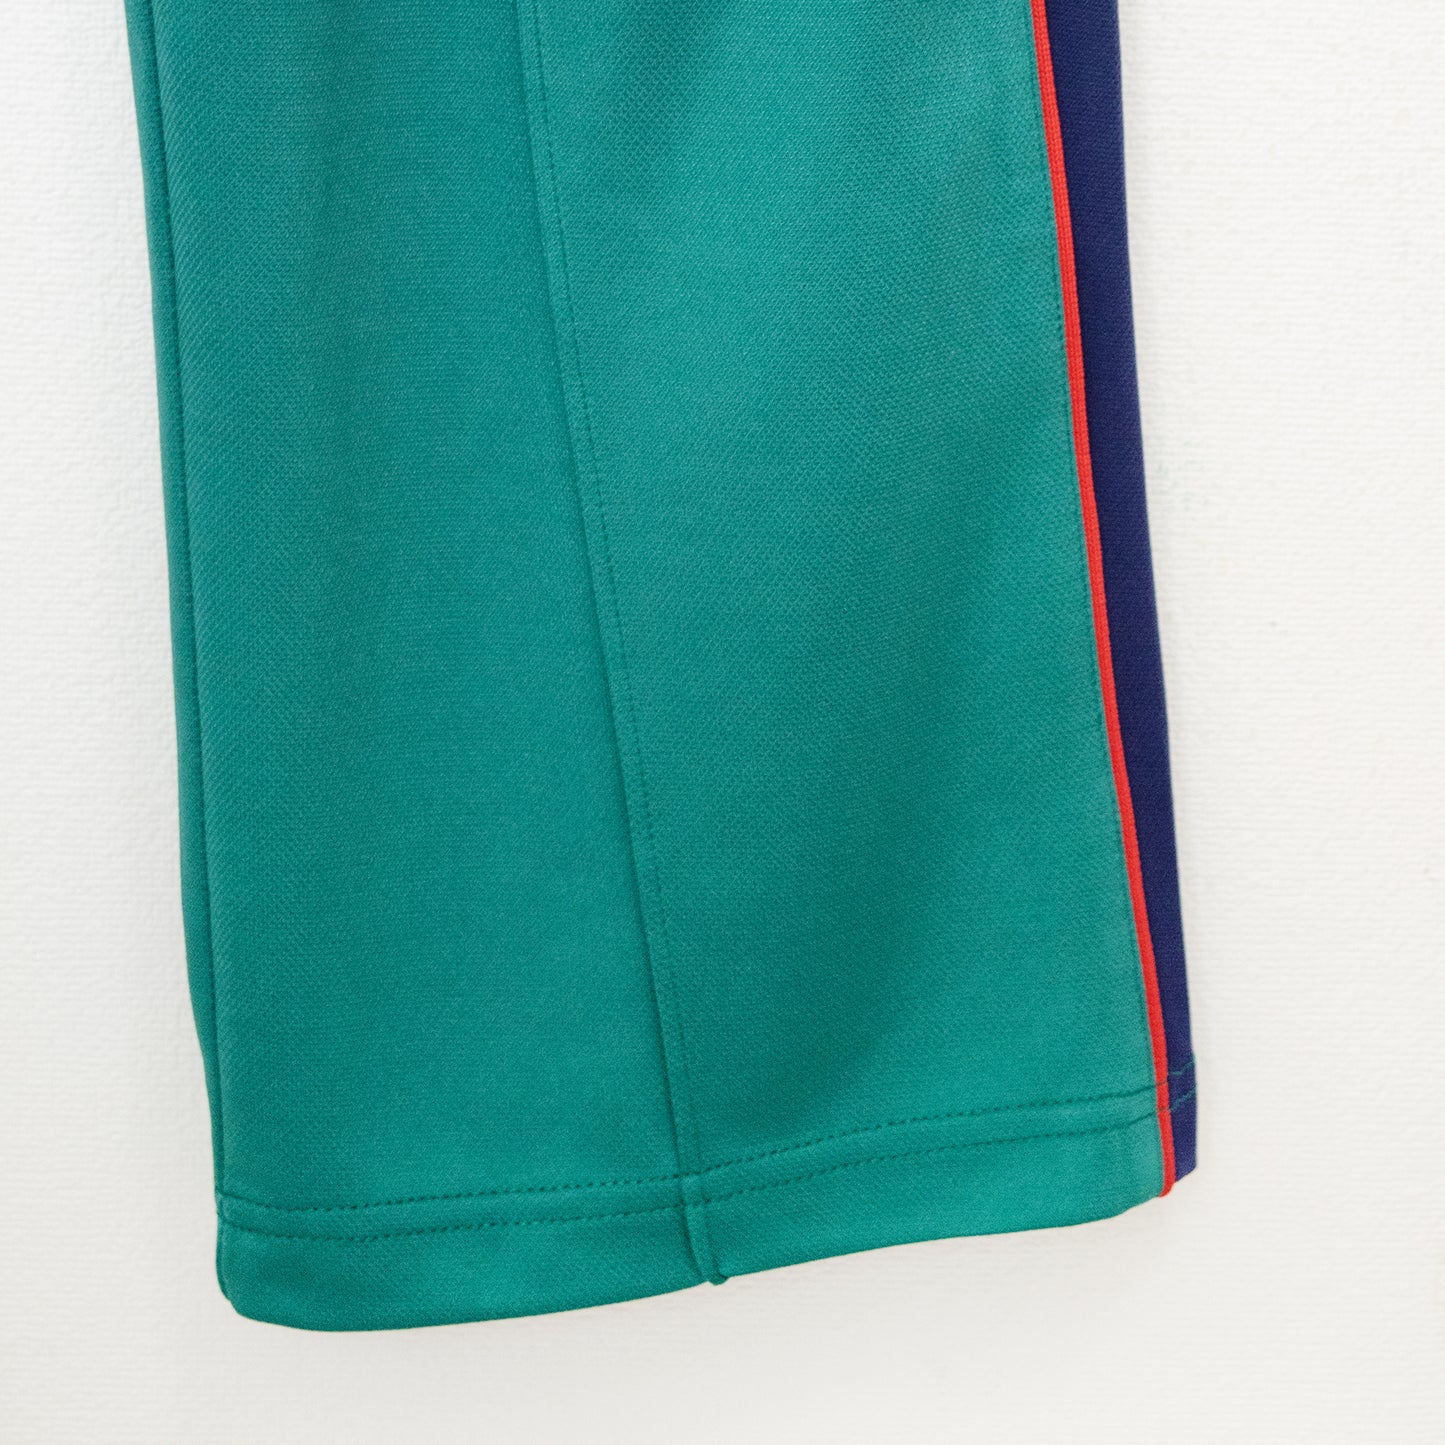 VISION STREET WEAR Side Line Color Jersey Pants - YOUAREMYPOISON